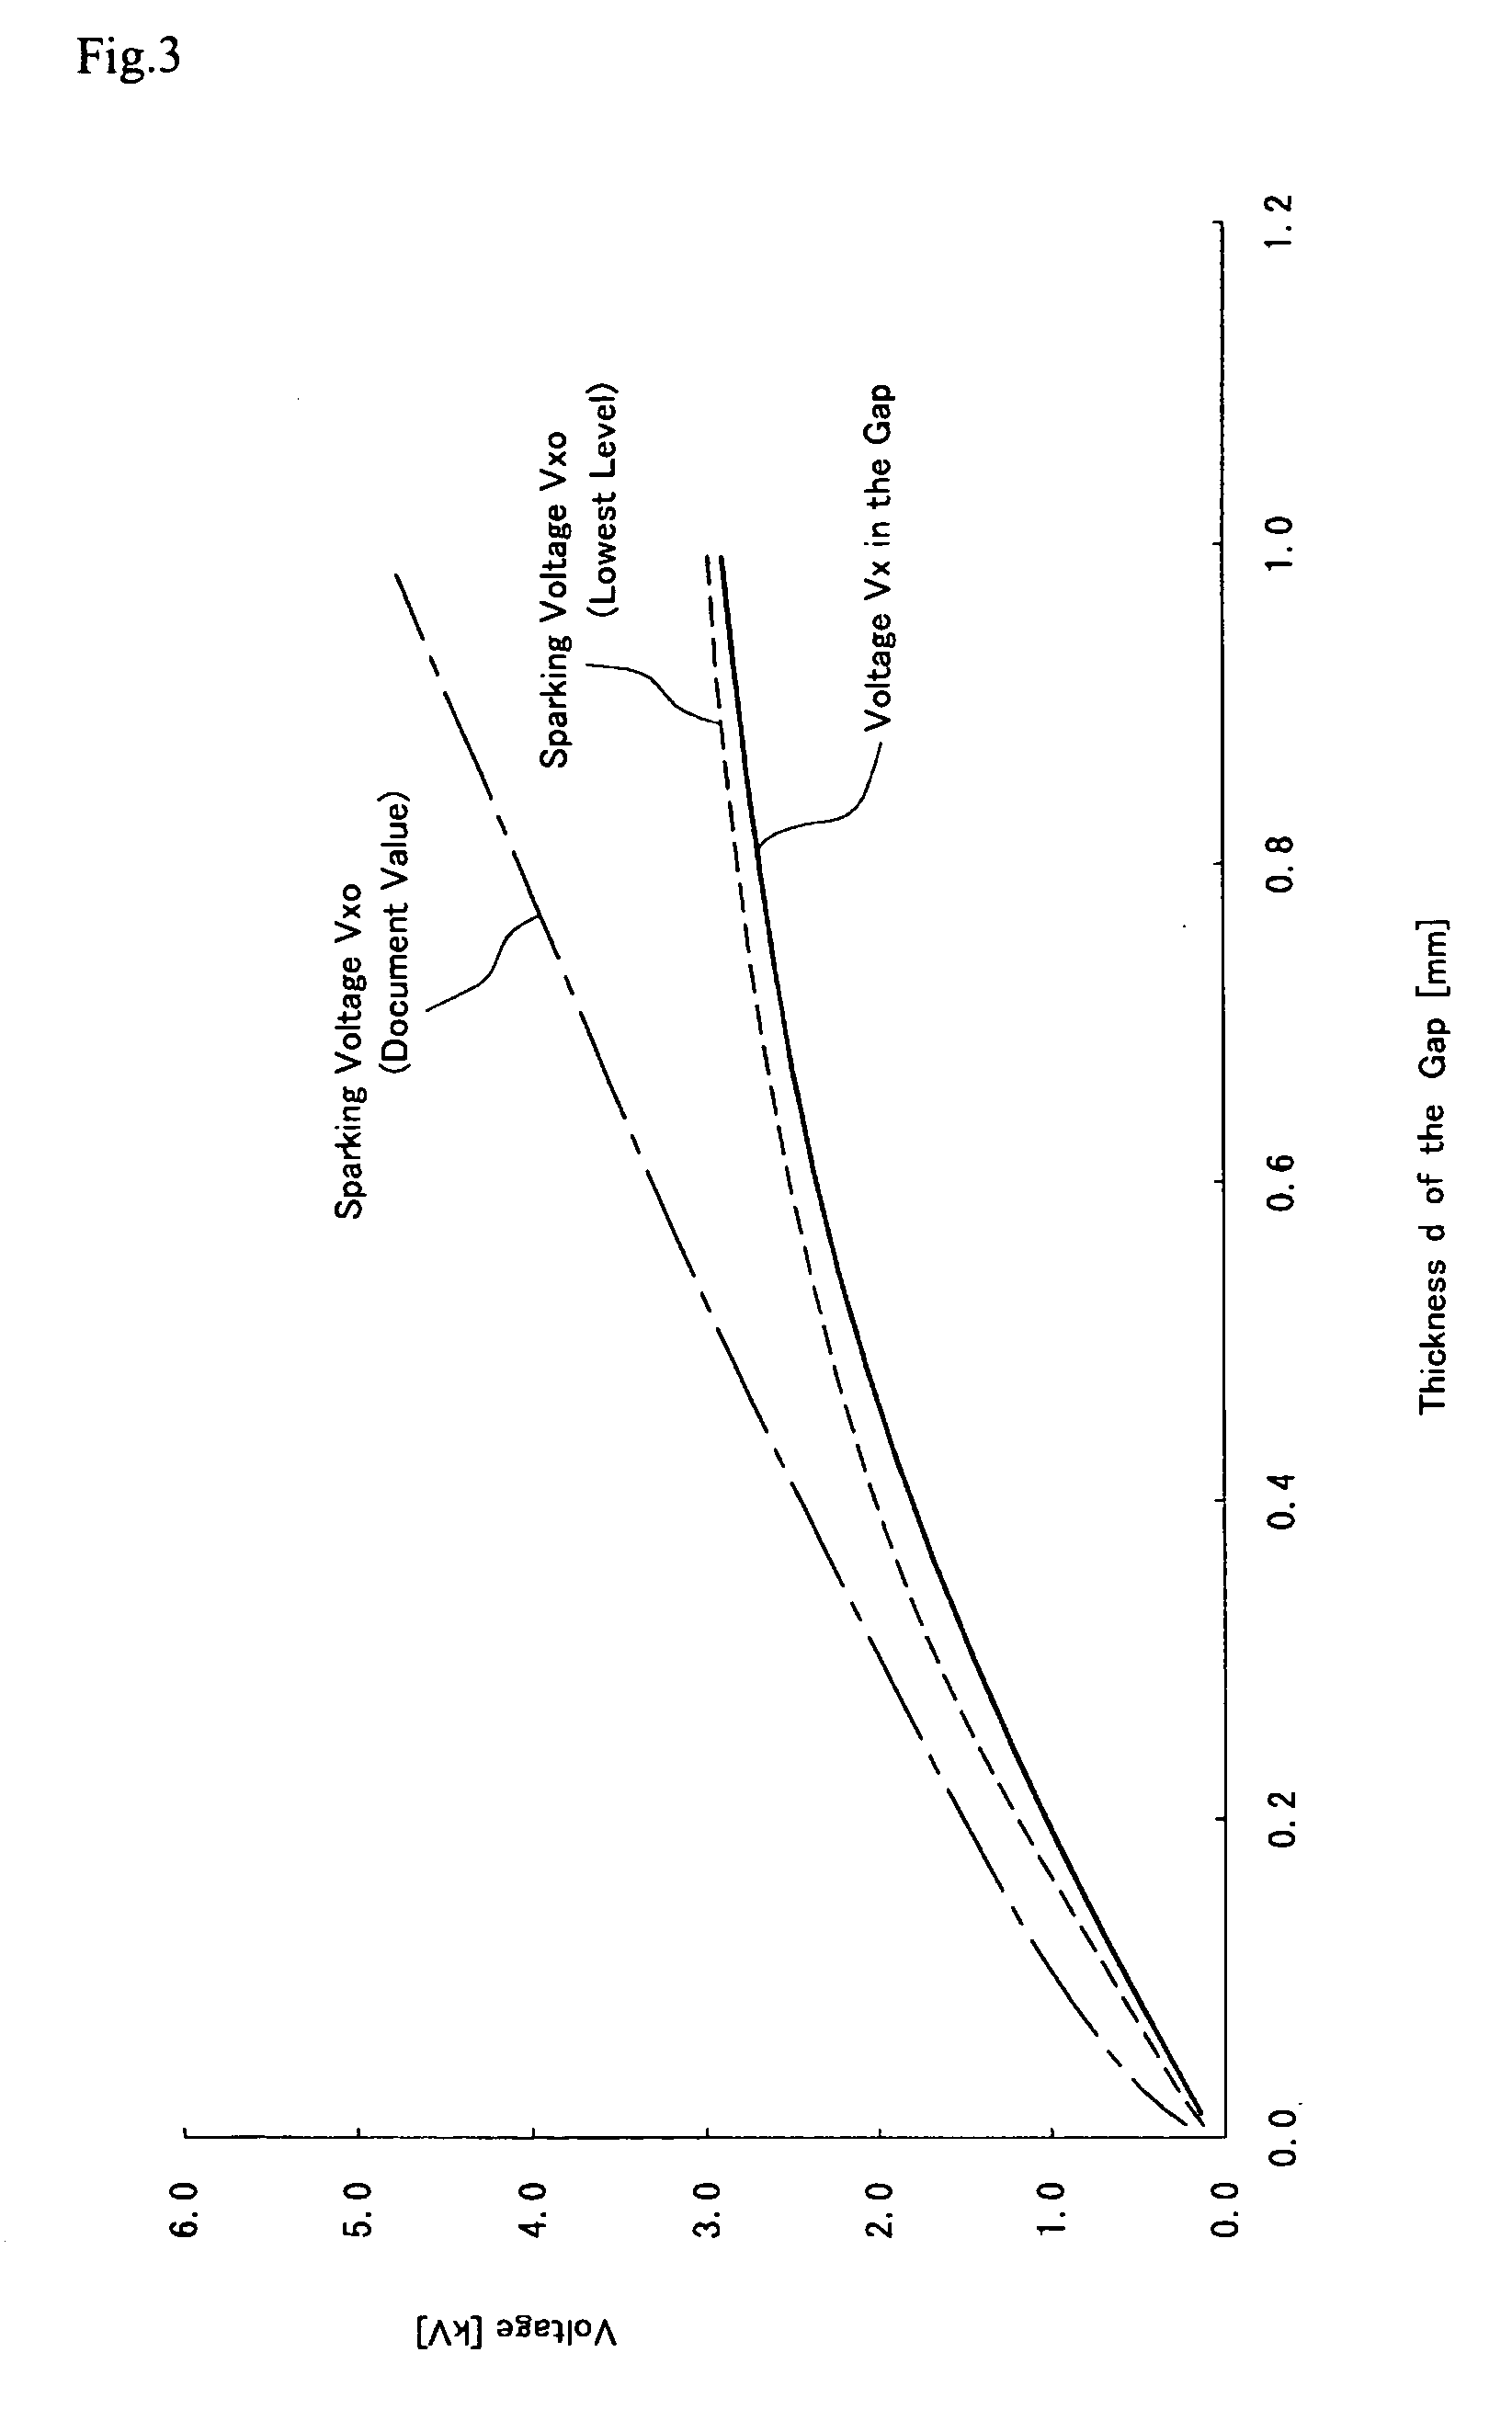 Plasma processing apparatus and method for manufacturing thereof